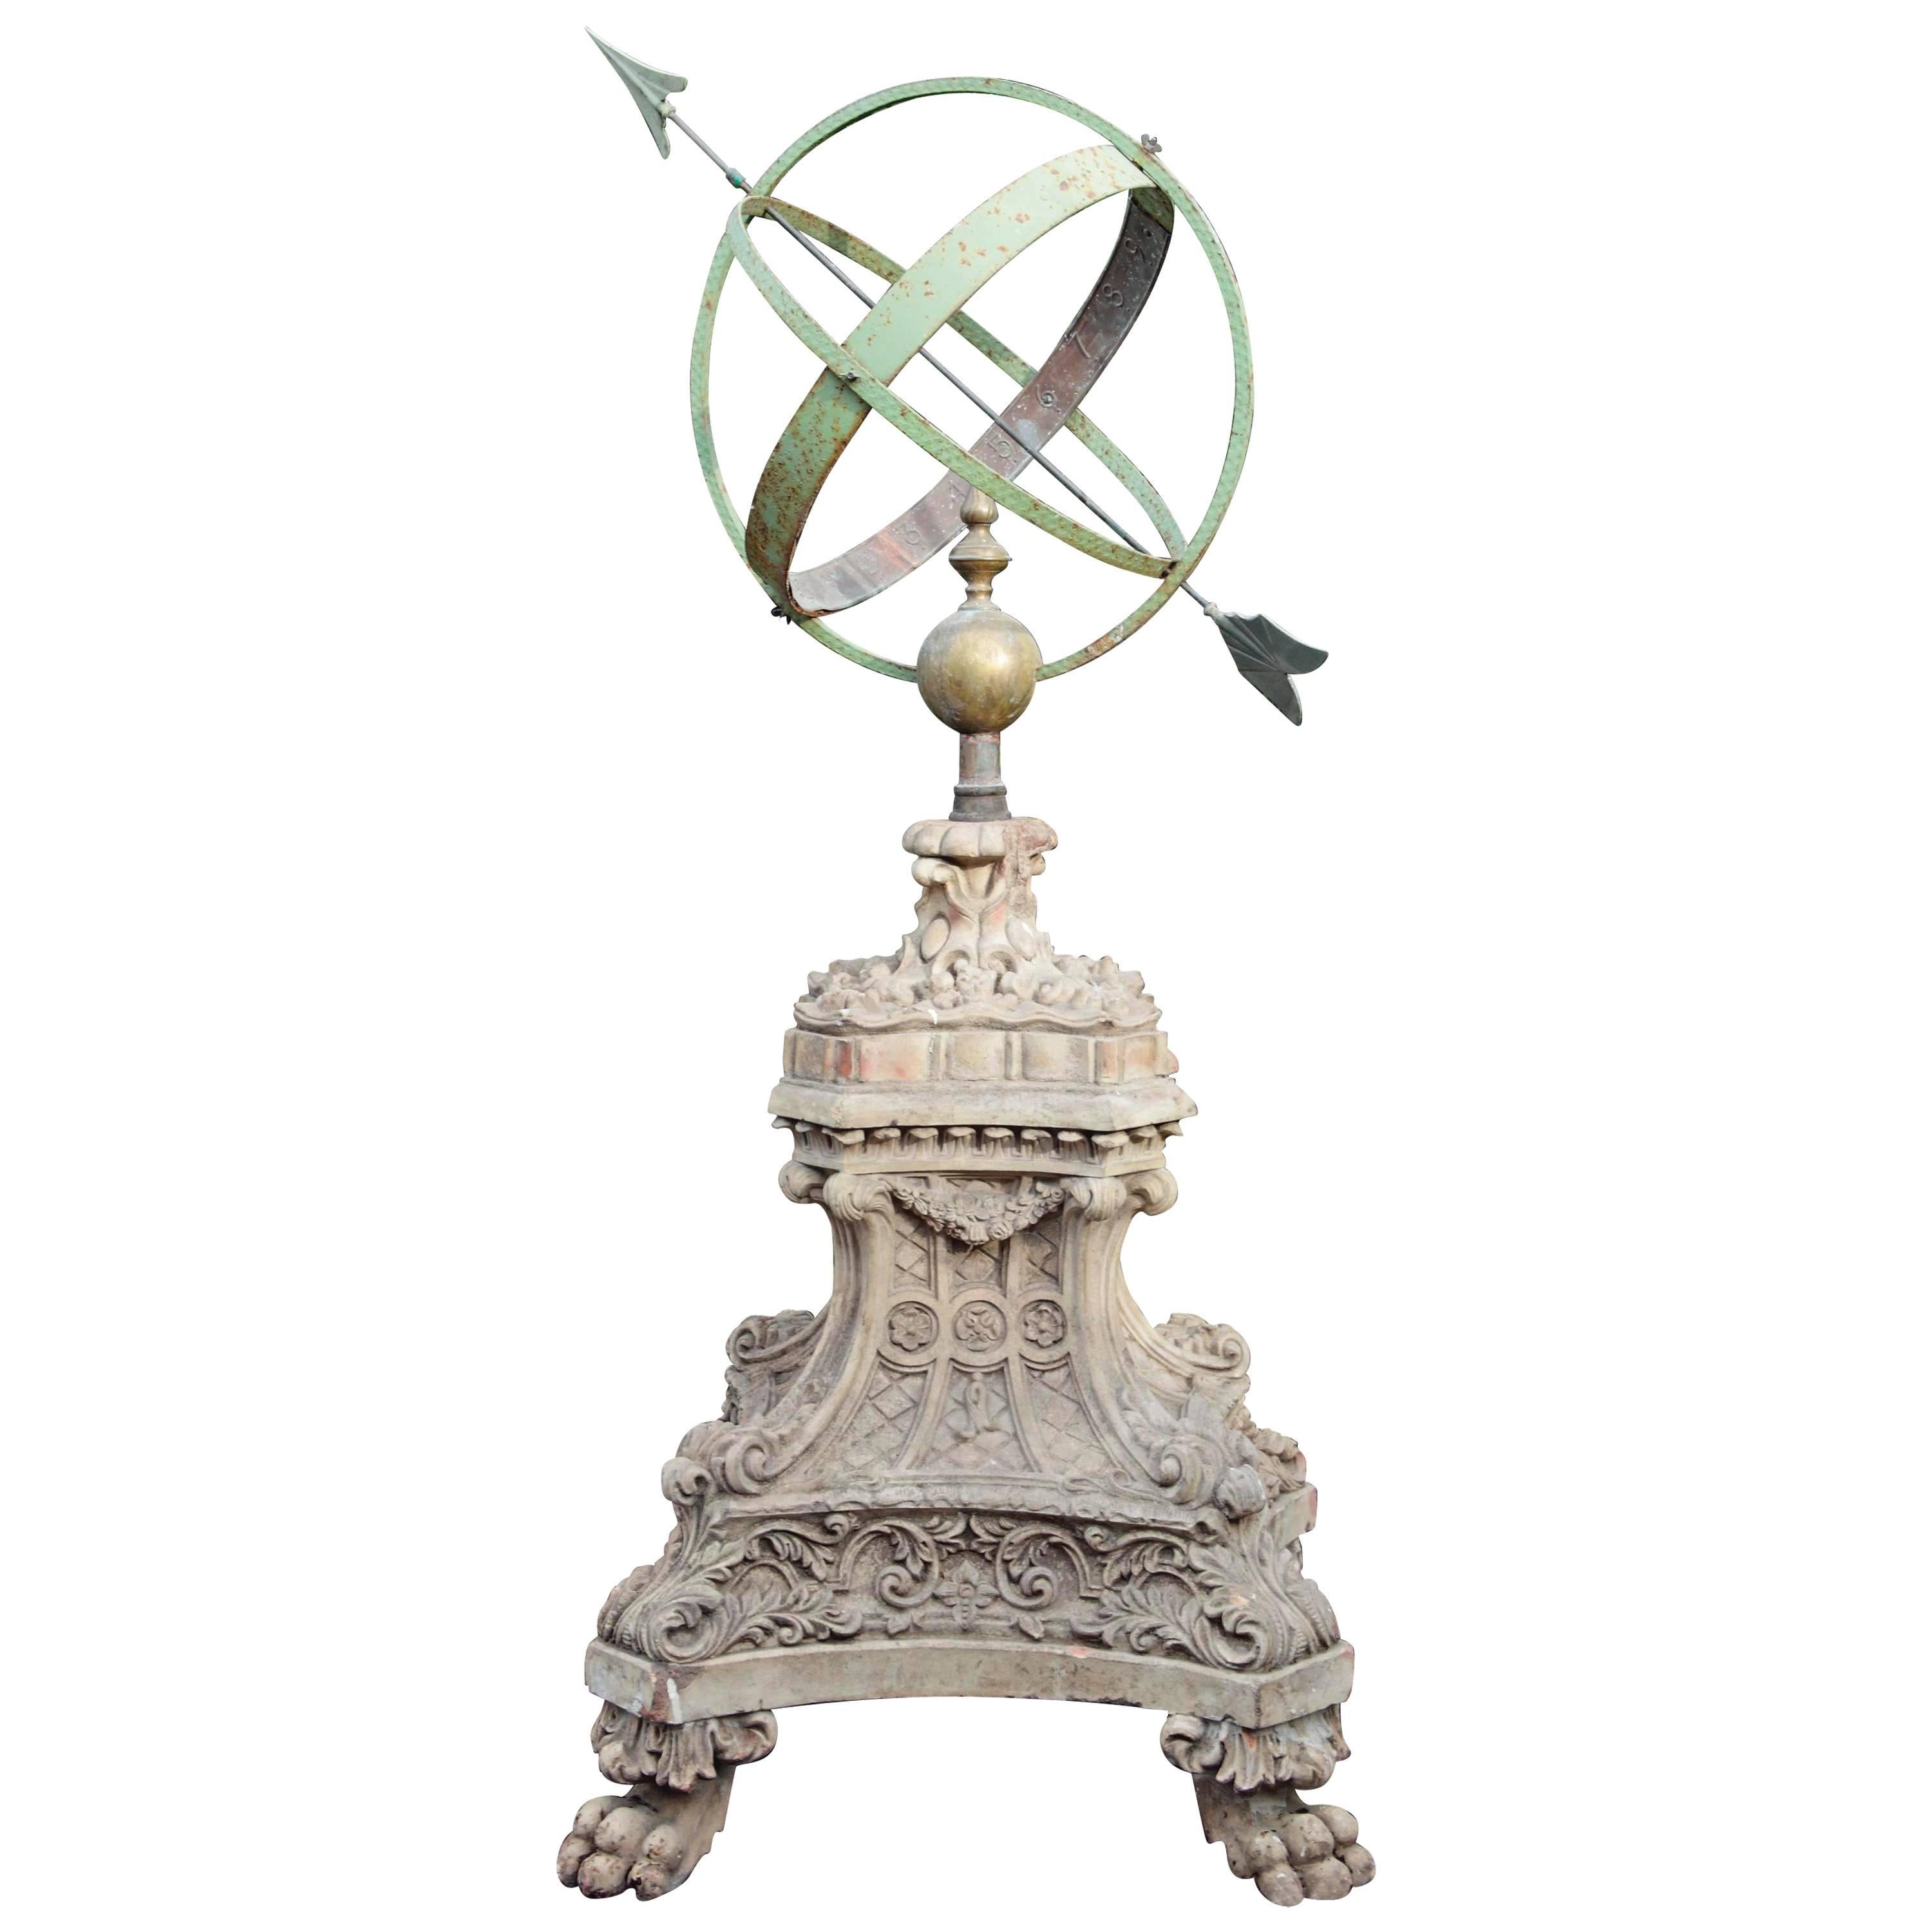 Bronze and Wrought Iron Armillary Sphere Mounted on a Terracotta Pedestal